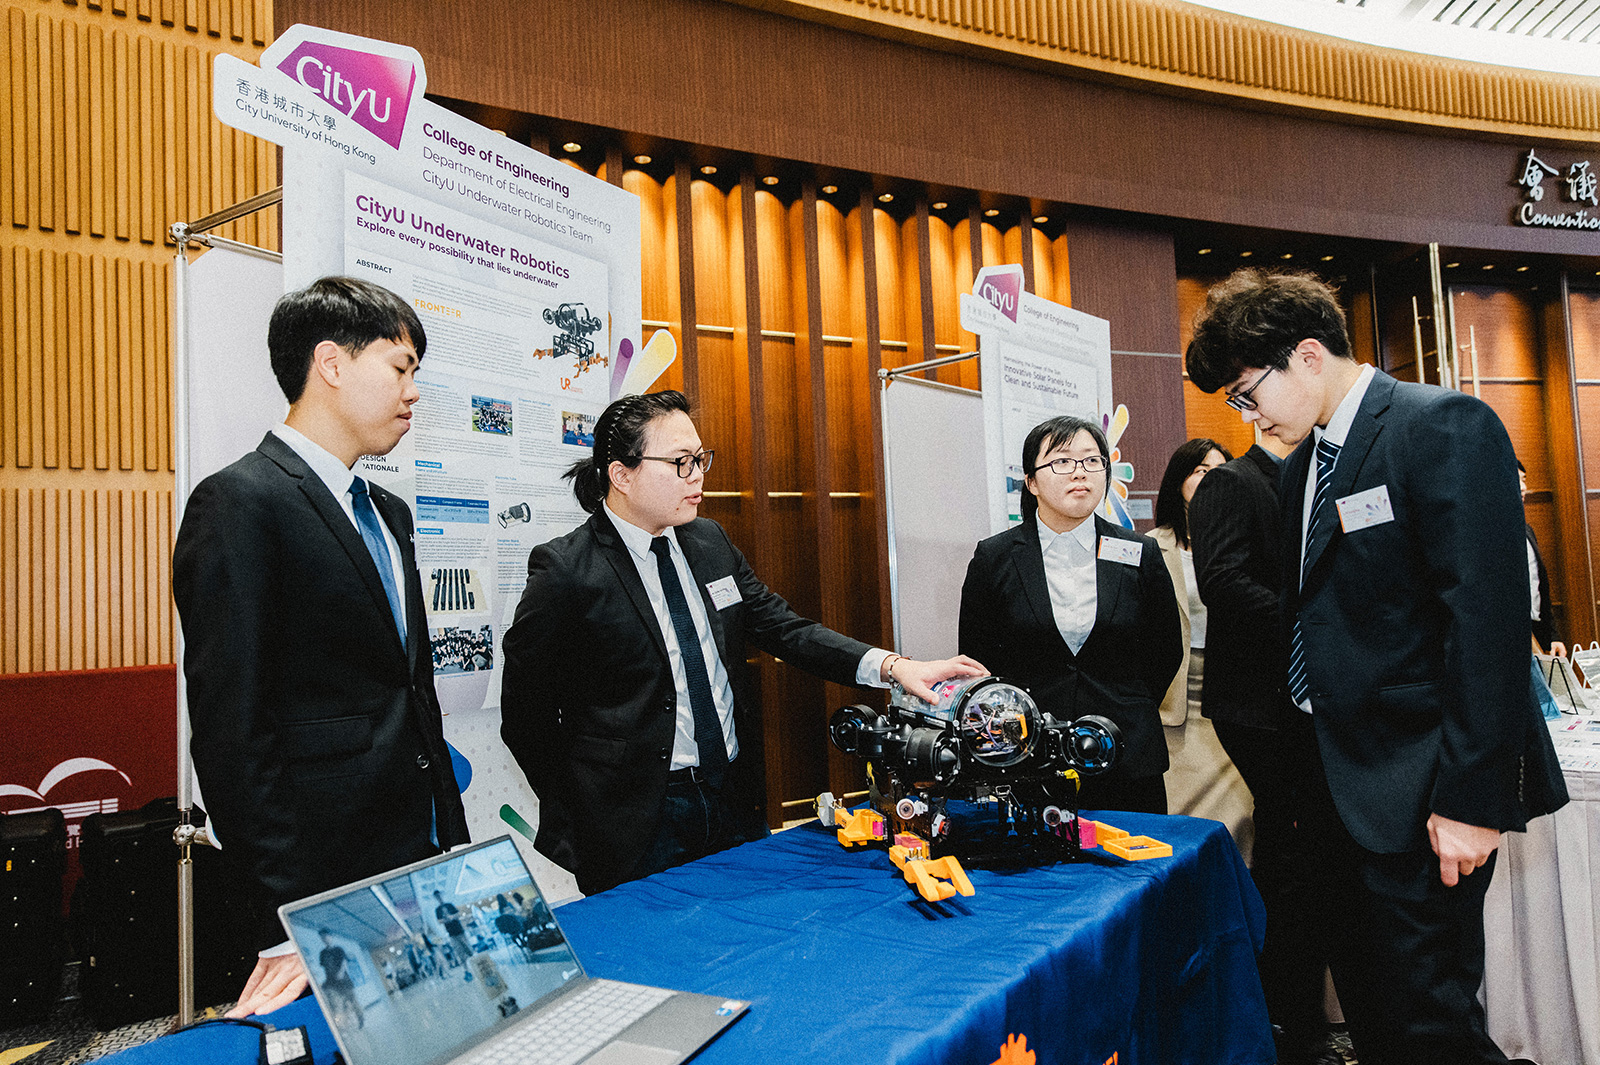 A CityU team showcased how to operate a remotely operated underwater robot to complete a series of complex tasks.